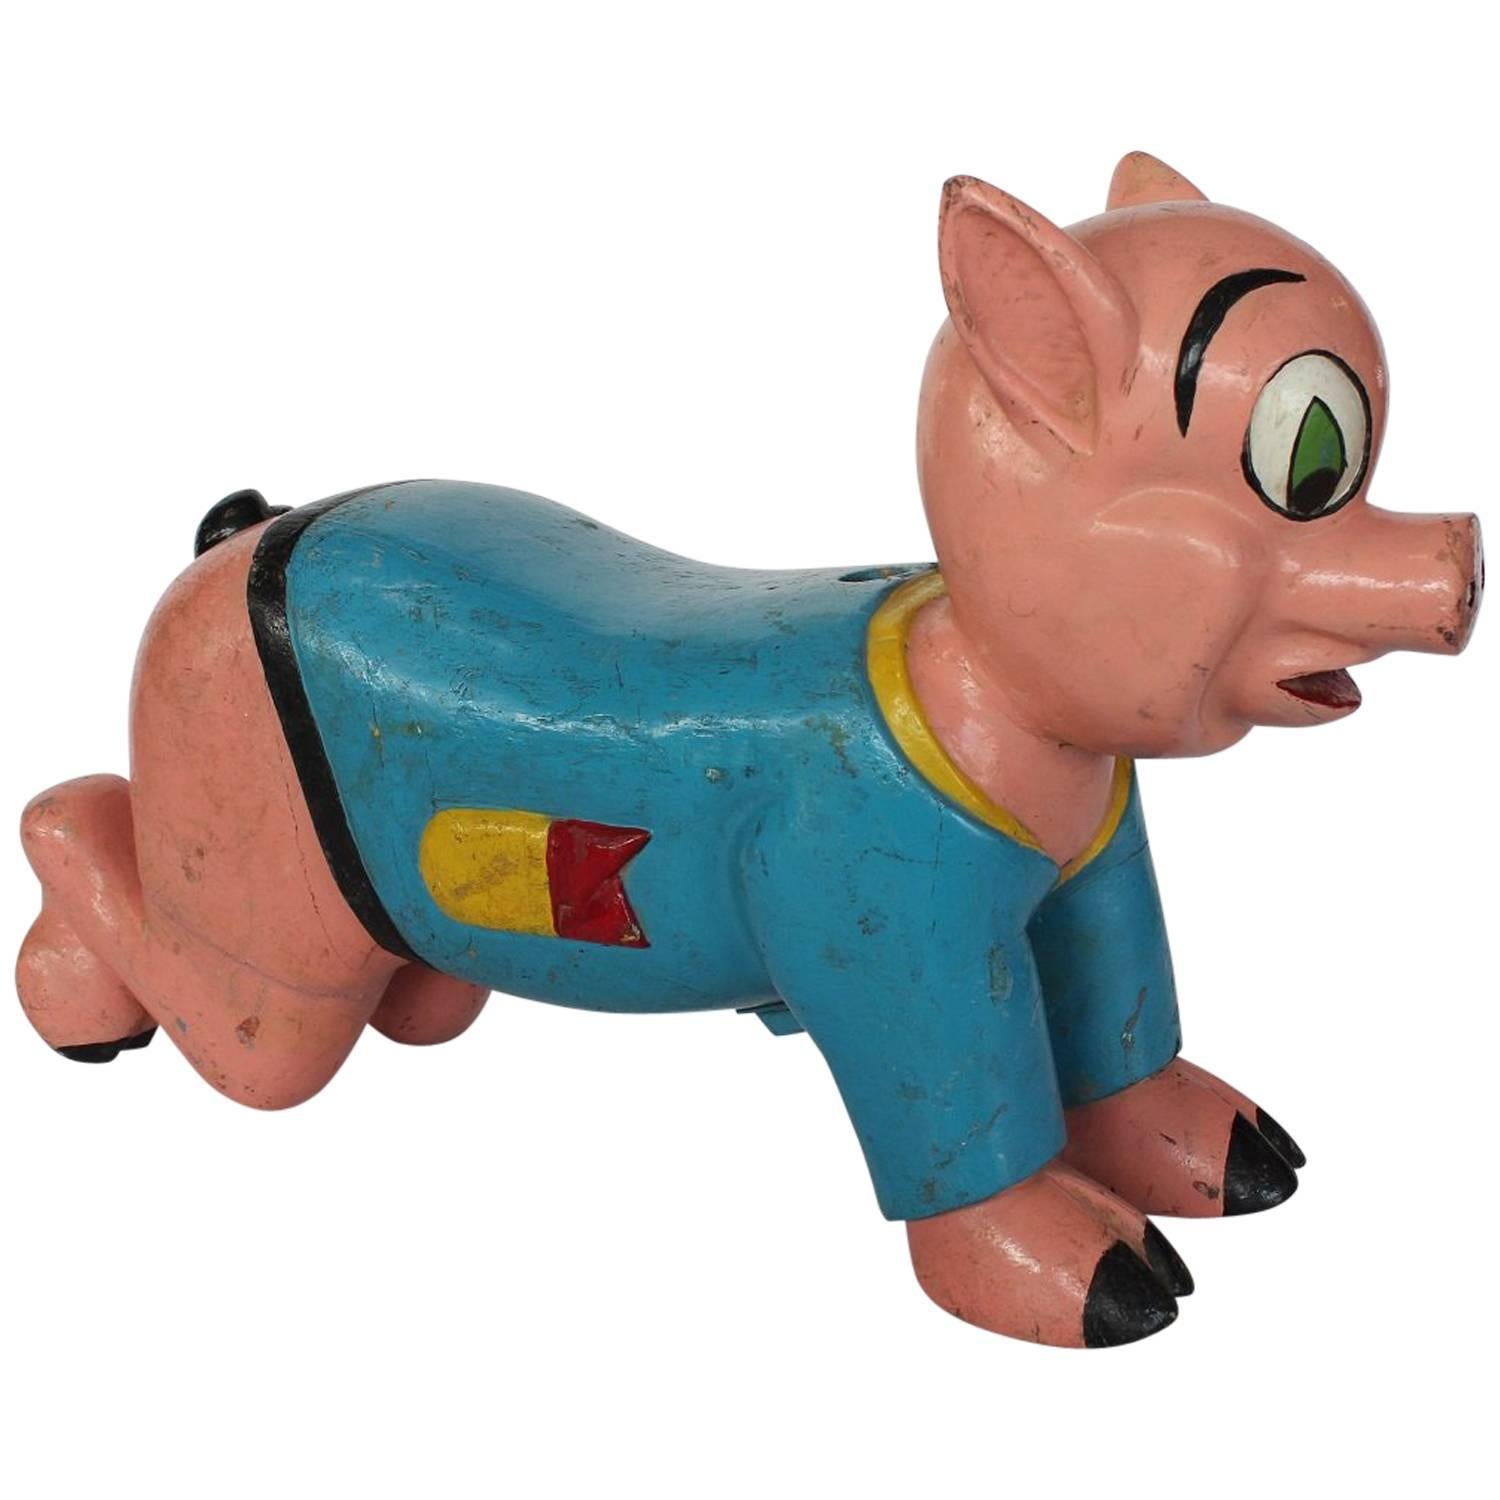 1930s Carnival Hand-Painted Wood Pig Ride For Sale